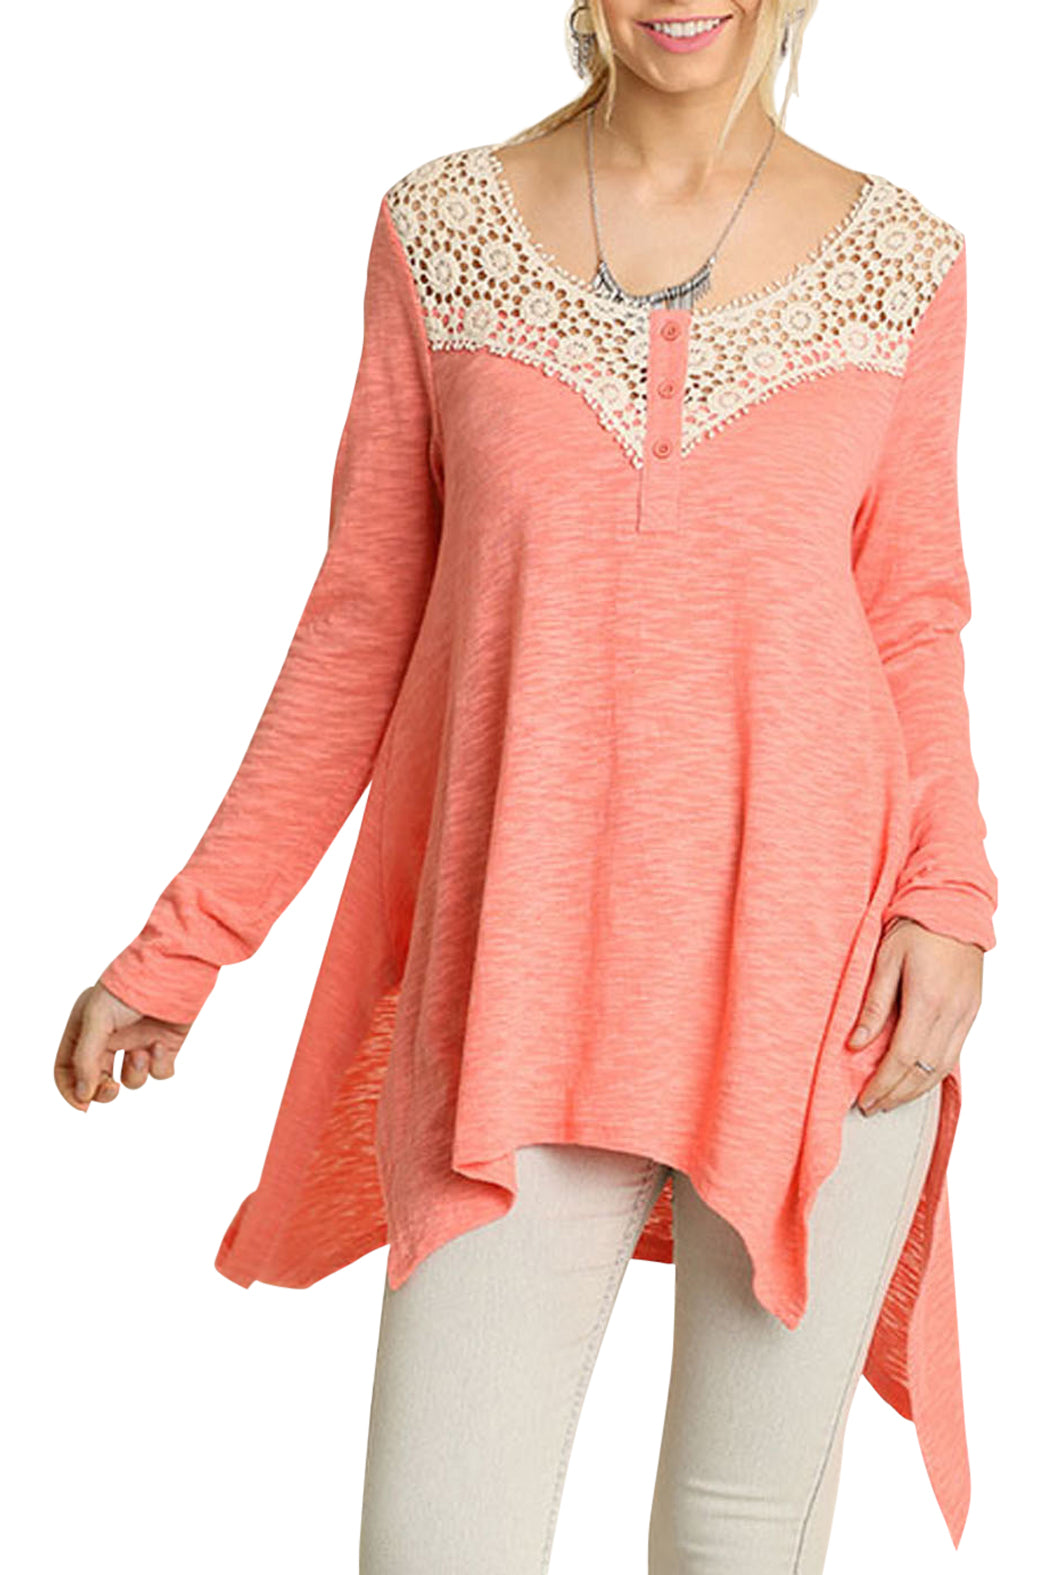 boho top, crochet inserted neckline with front button, long sleeves, hi-low hemline 